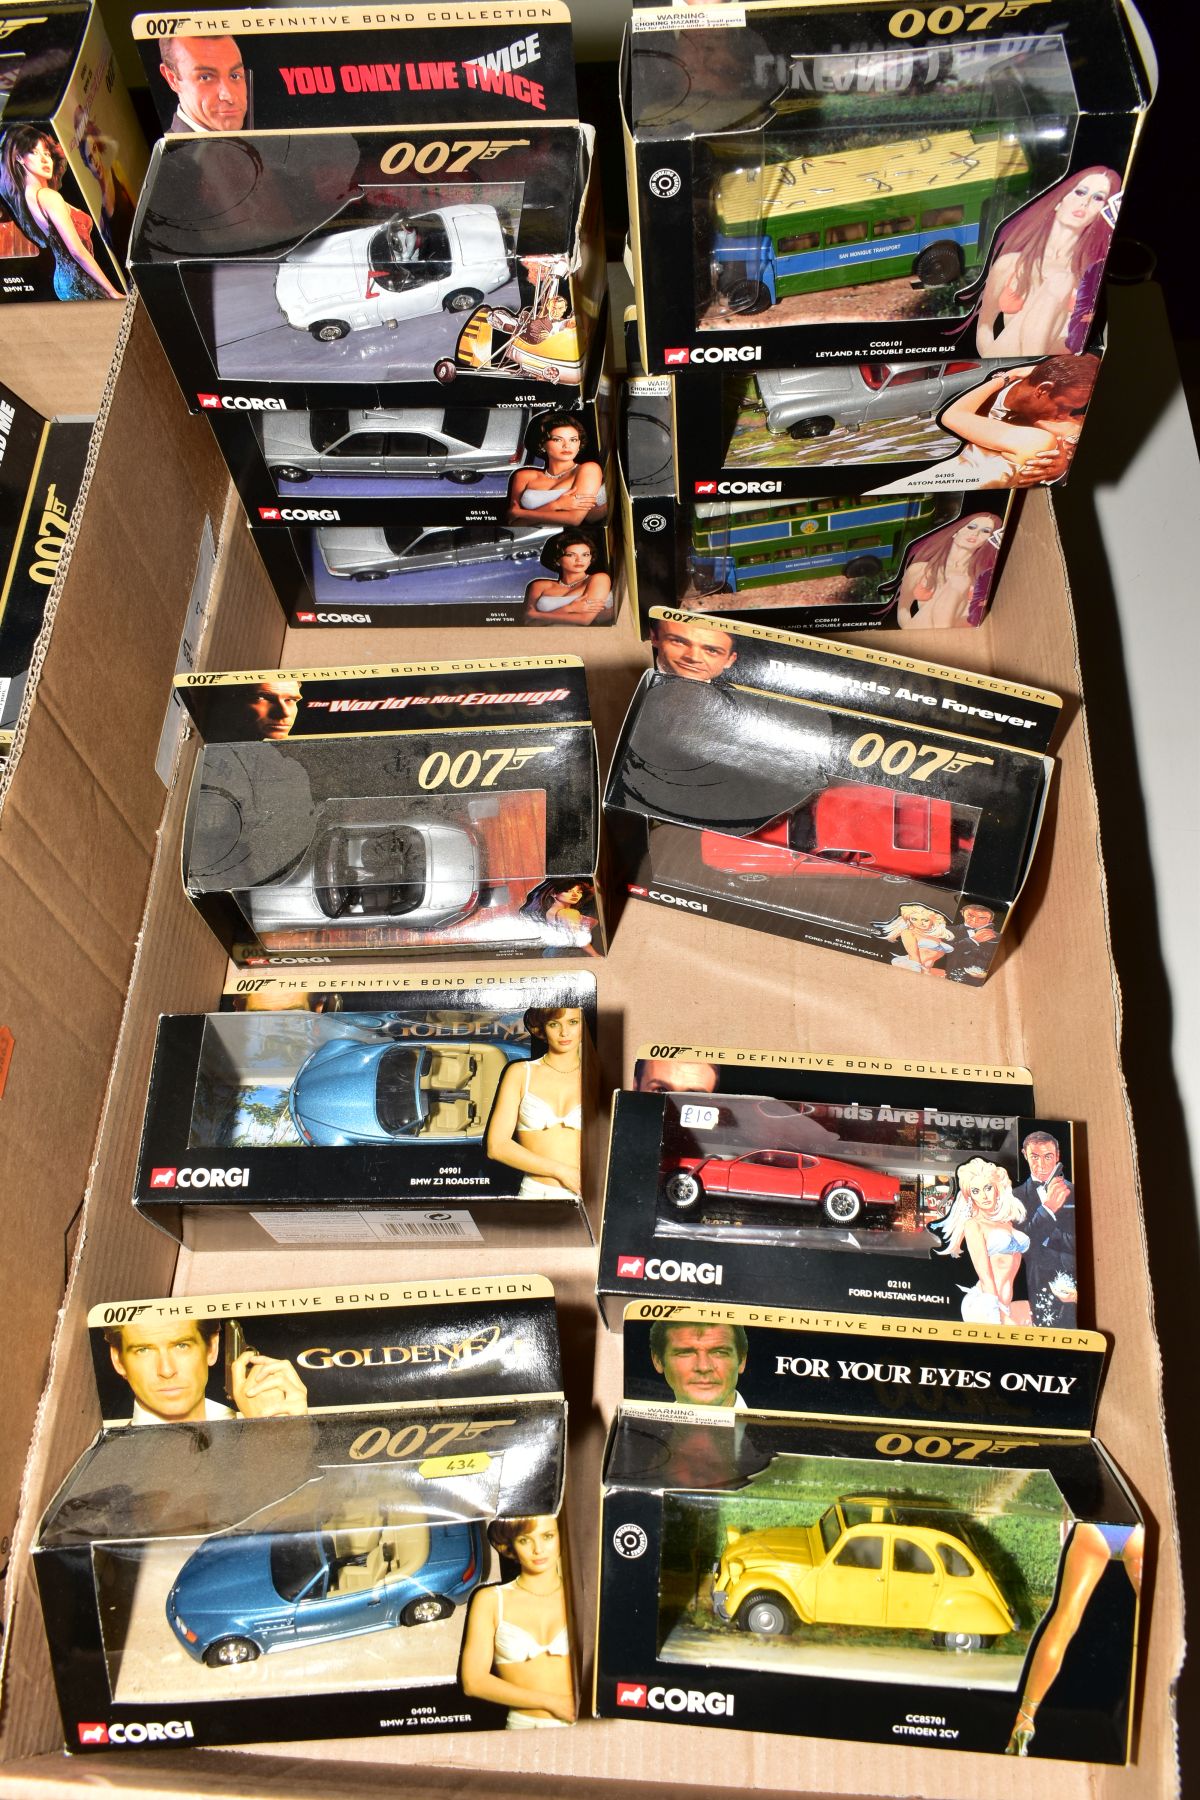 A QUANTITY OF BOXED CORGI CLASSICS JAMES BOND VEHICLES FROM THE DEFINITIVE BOND COLLECTION, many - Image 4 of 8